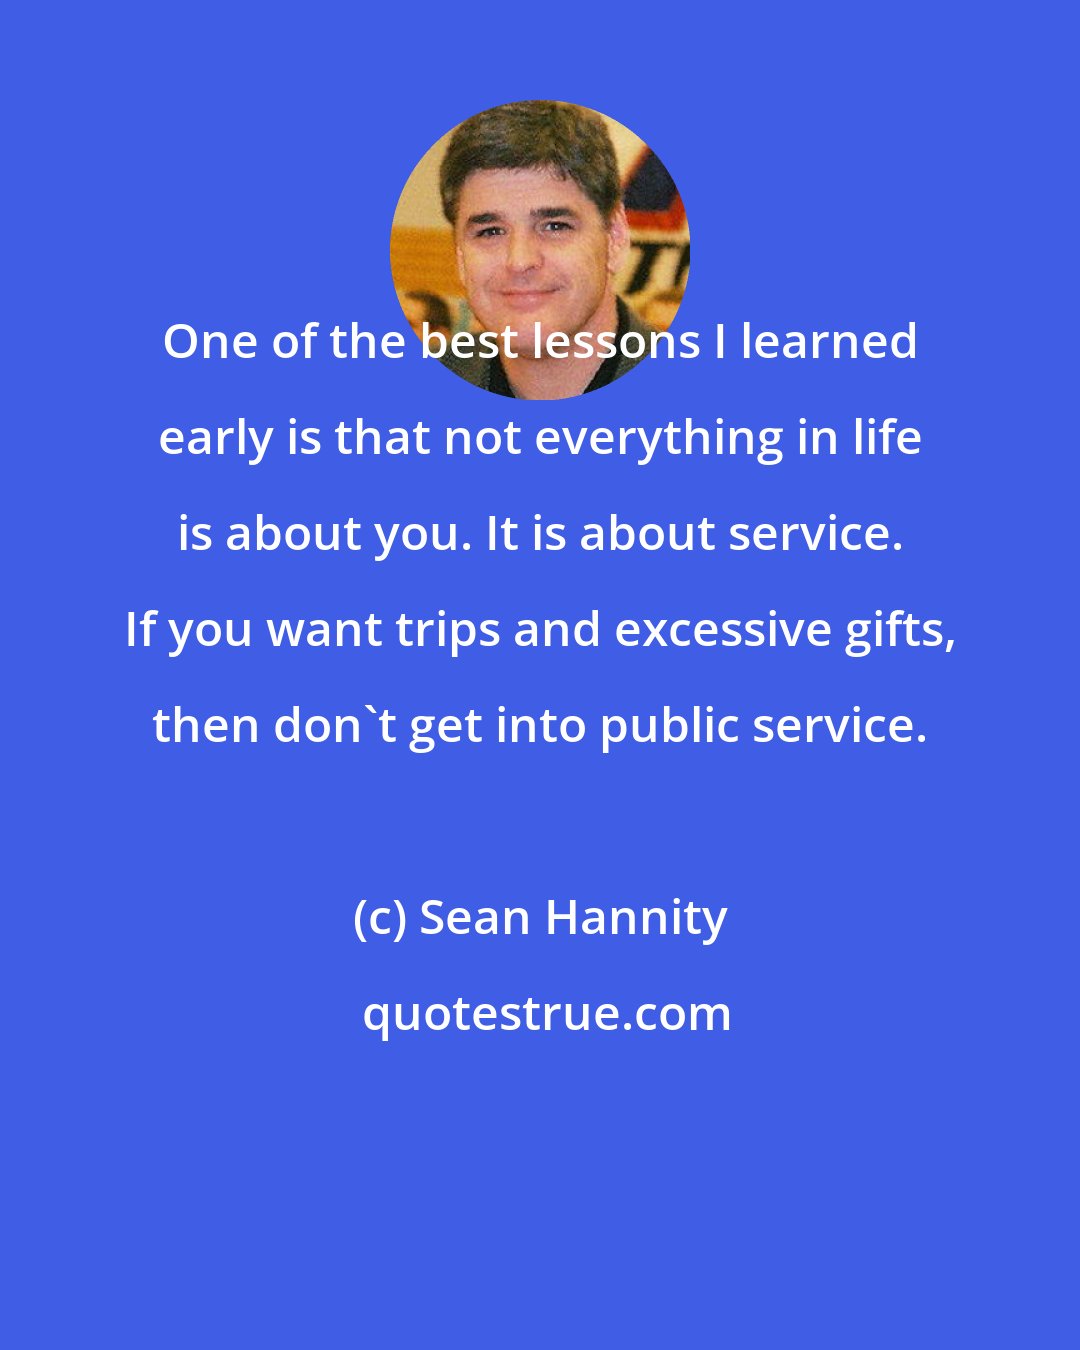 Sean Hannity: One of the best lessons I learned early is that not everything in life is about you. It is about service. If you want trips and excessive gifts, then don't get into public service.